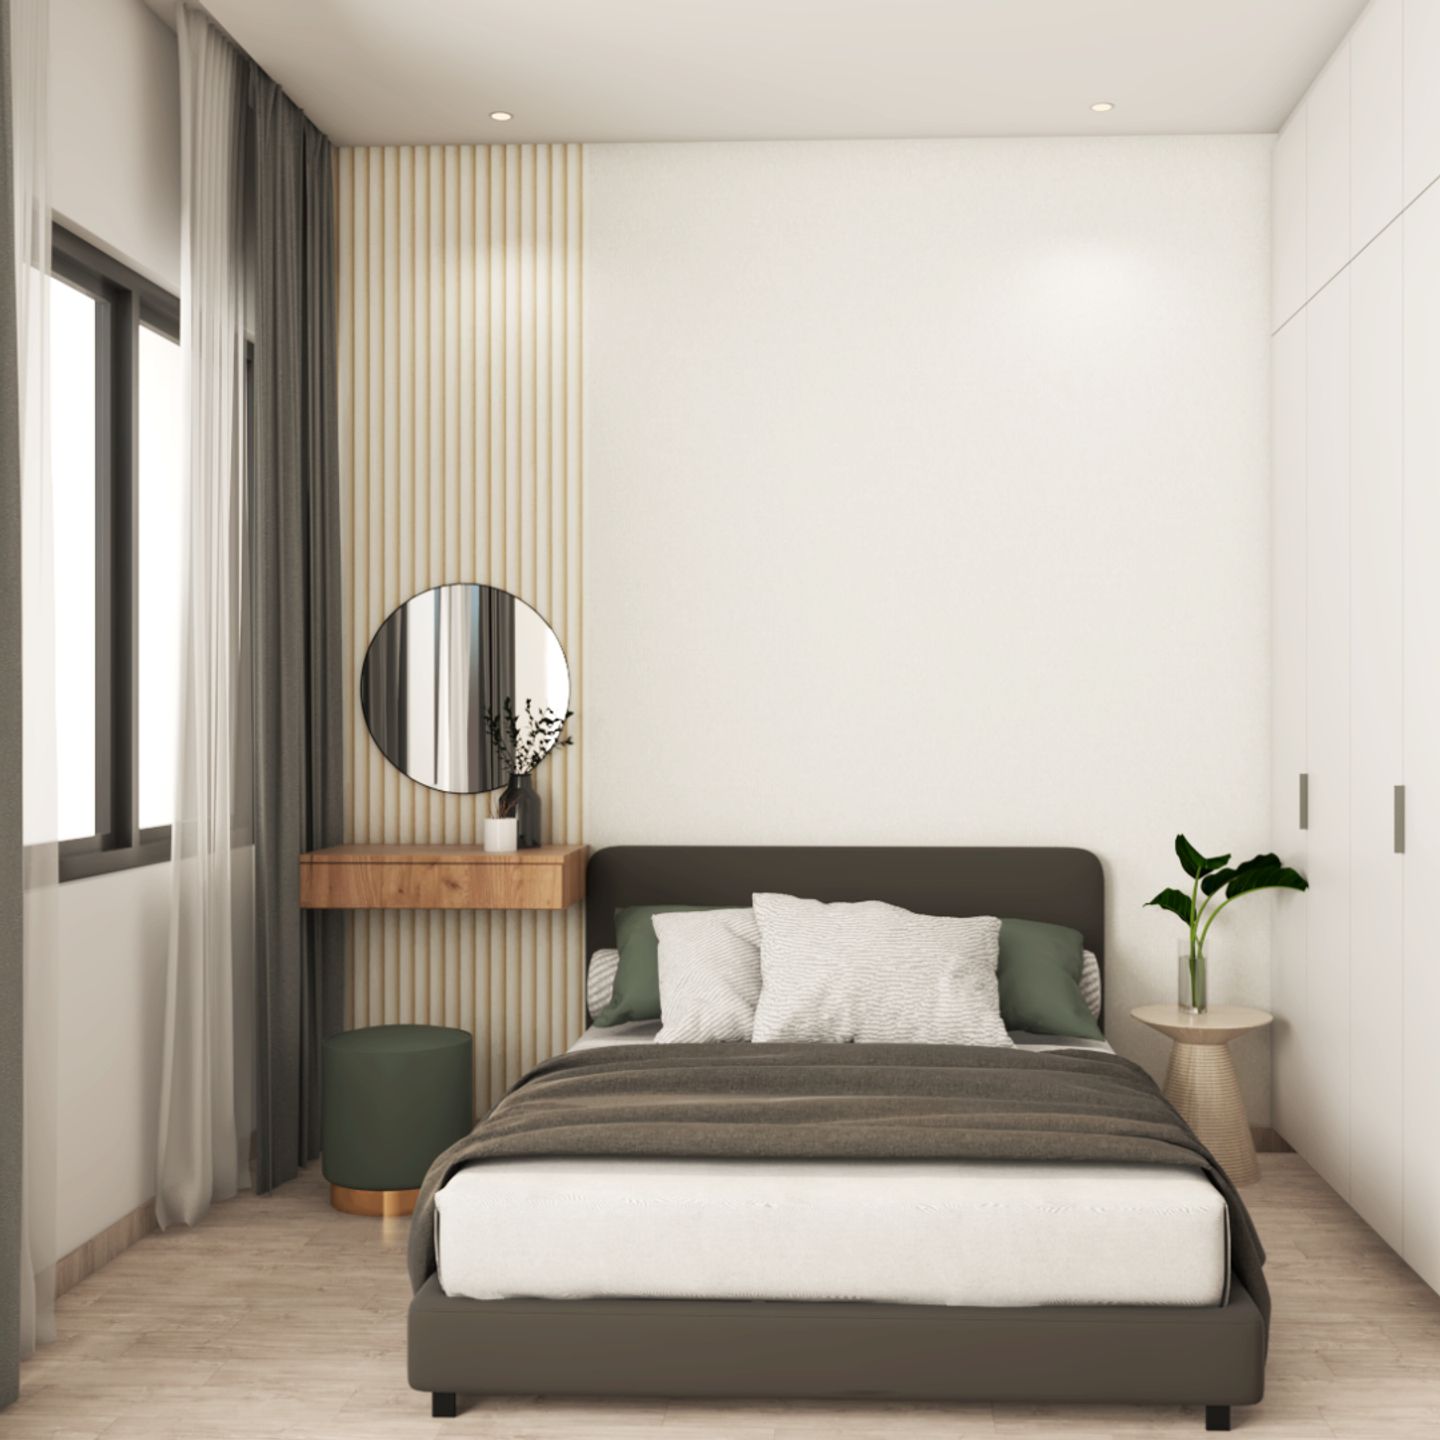 Contemporary Bedroom Design With a Double Bed And Light-Coloured Walls And Flooring - Livspace